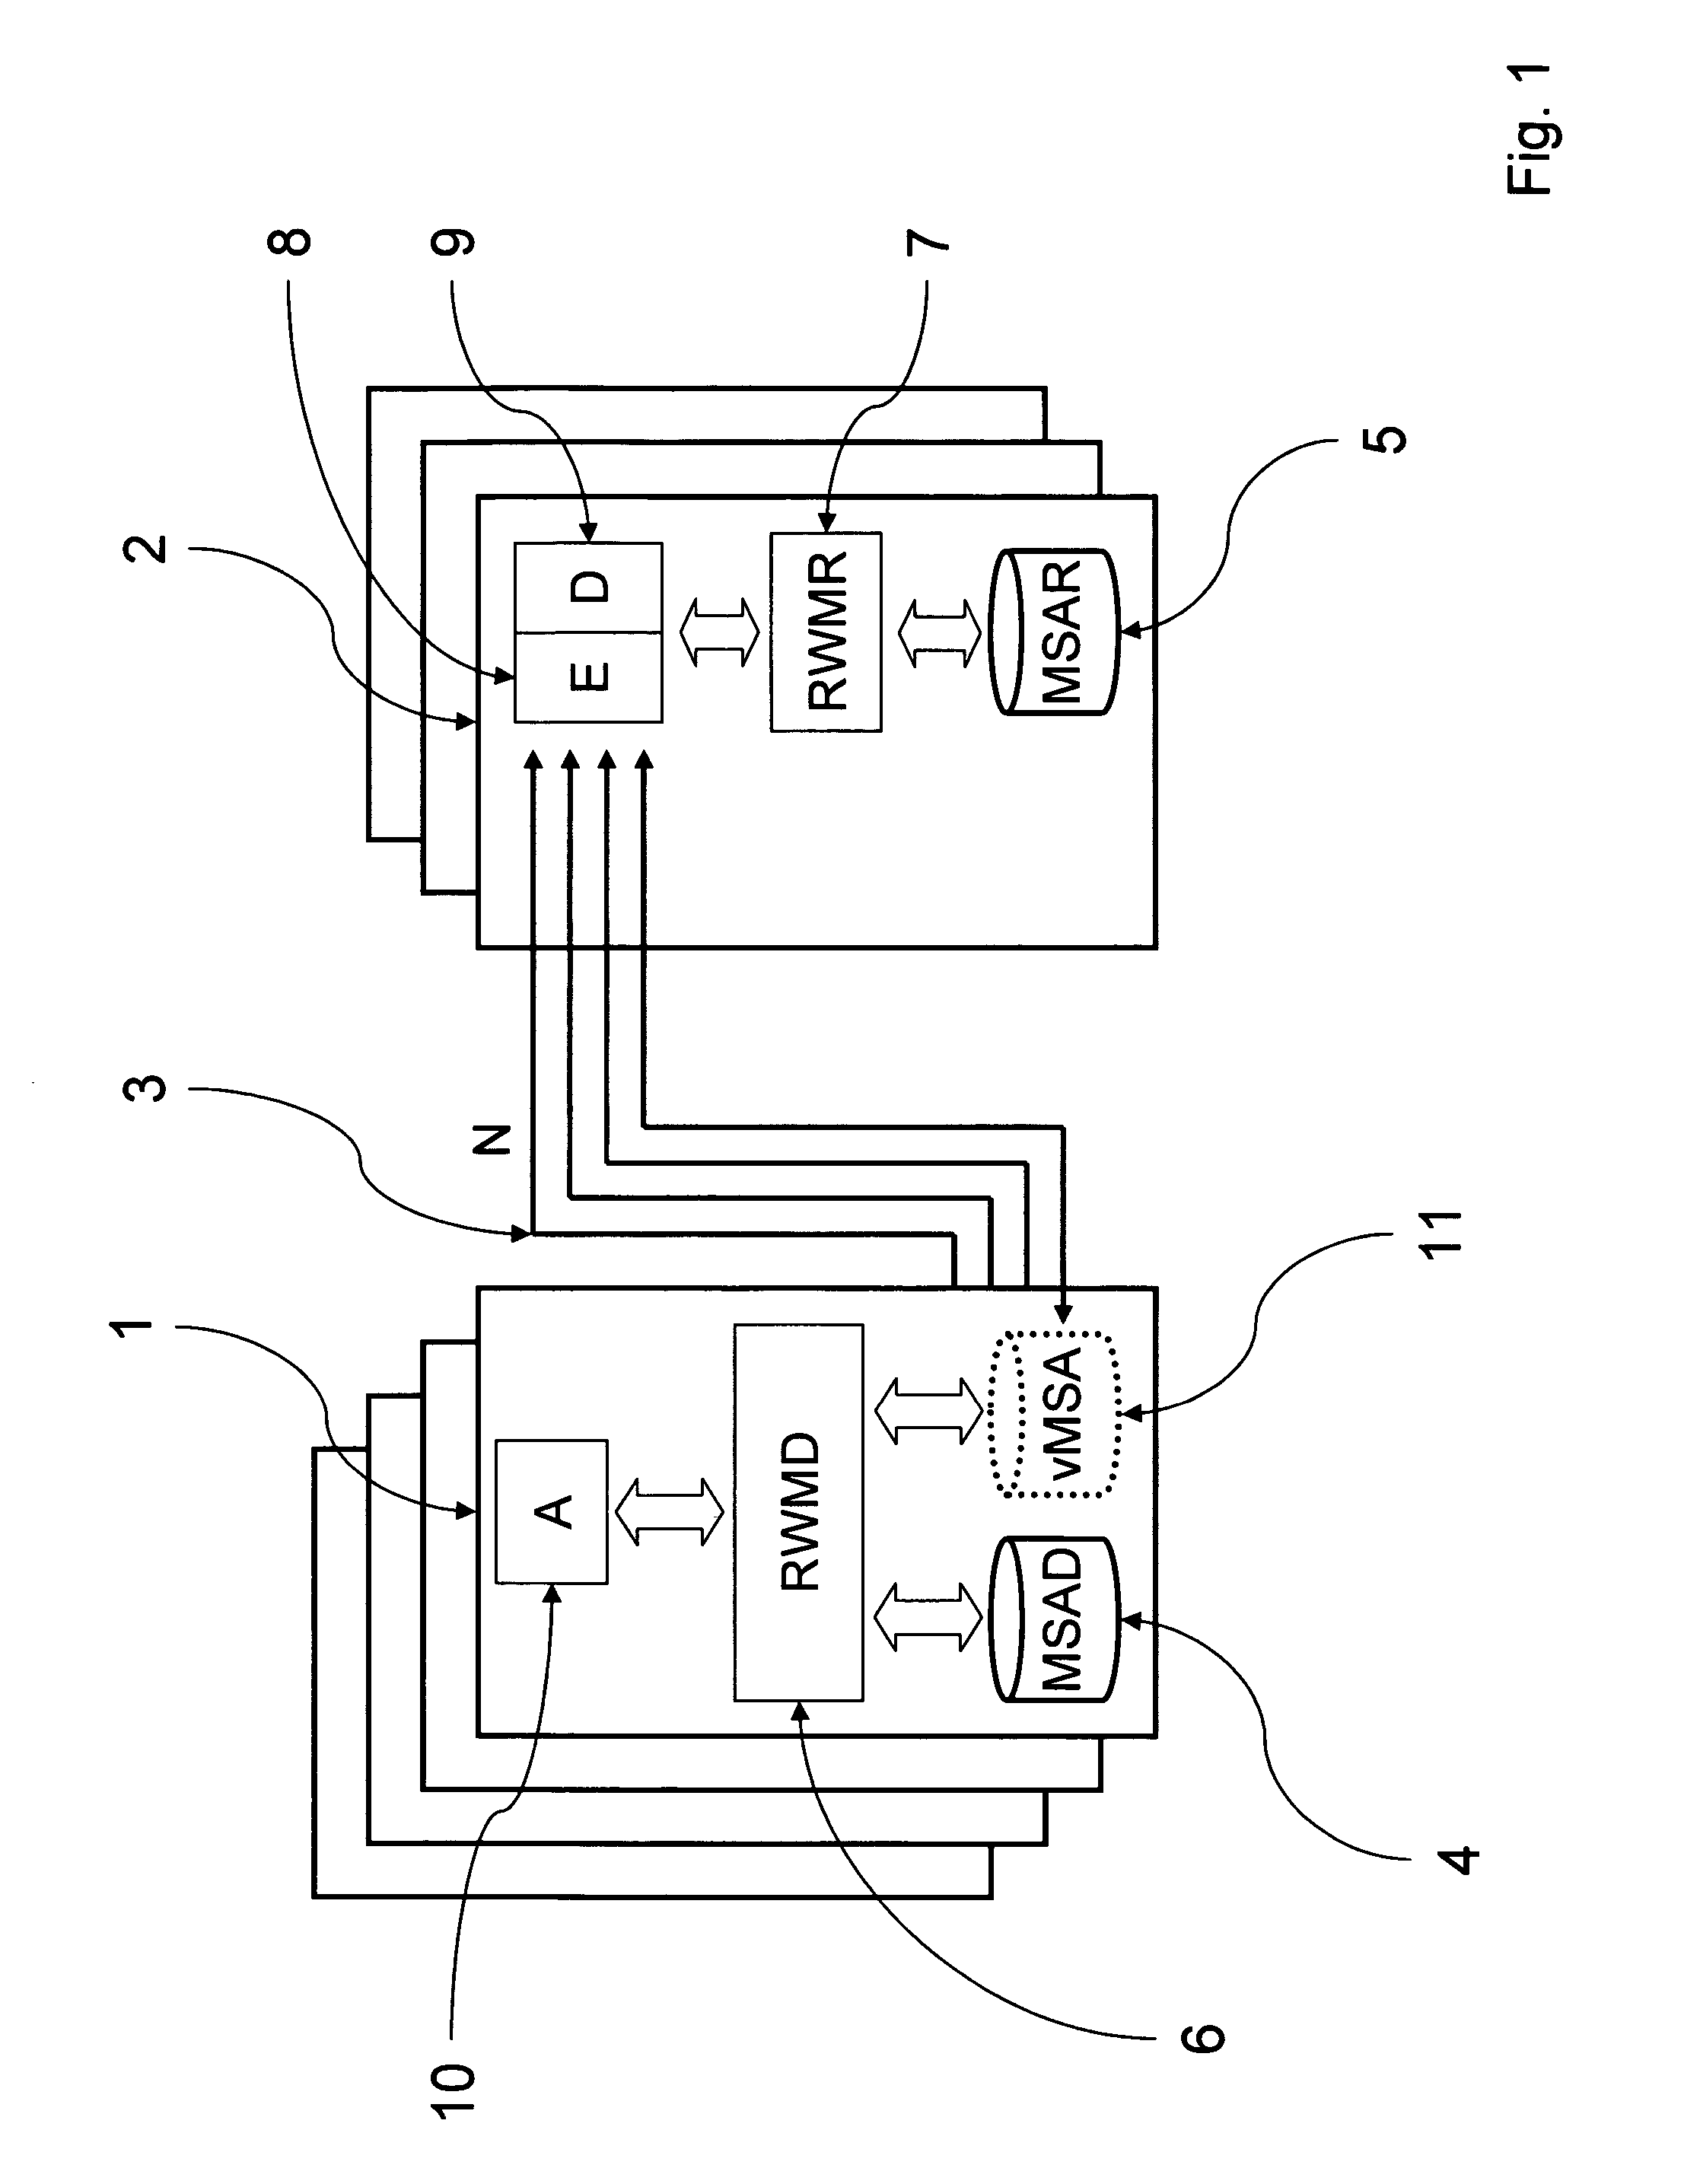 Method and apparatus for enabling high-reliability storage of distributed data on a plurality of independent storage devices